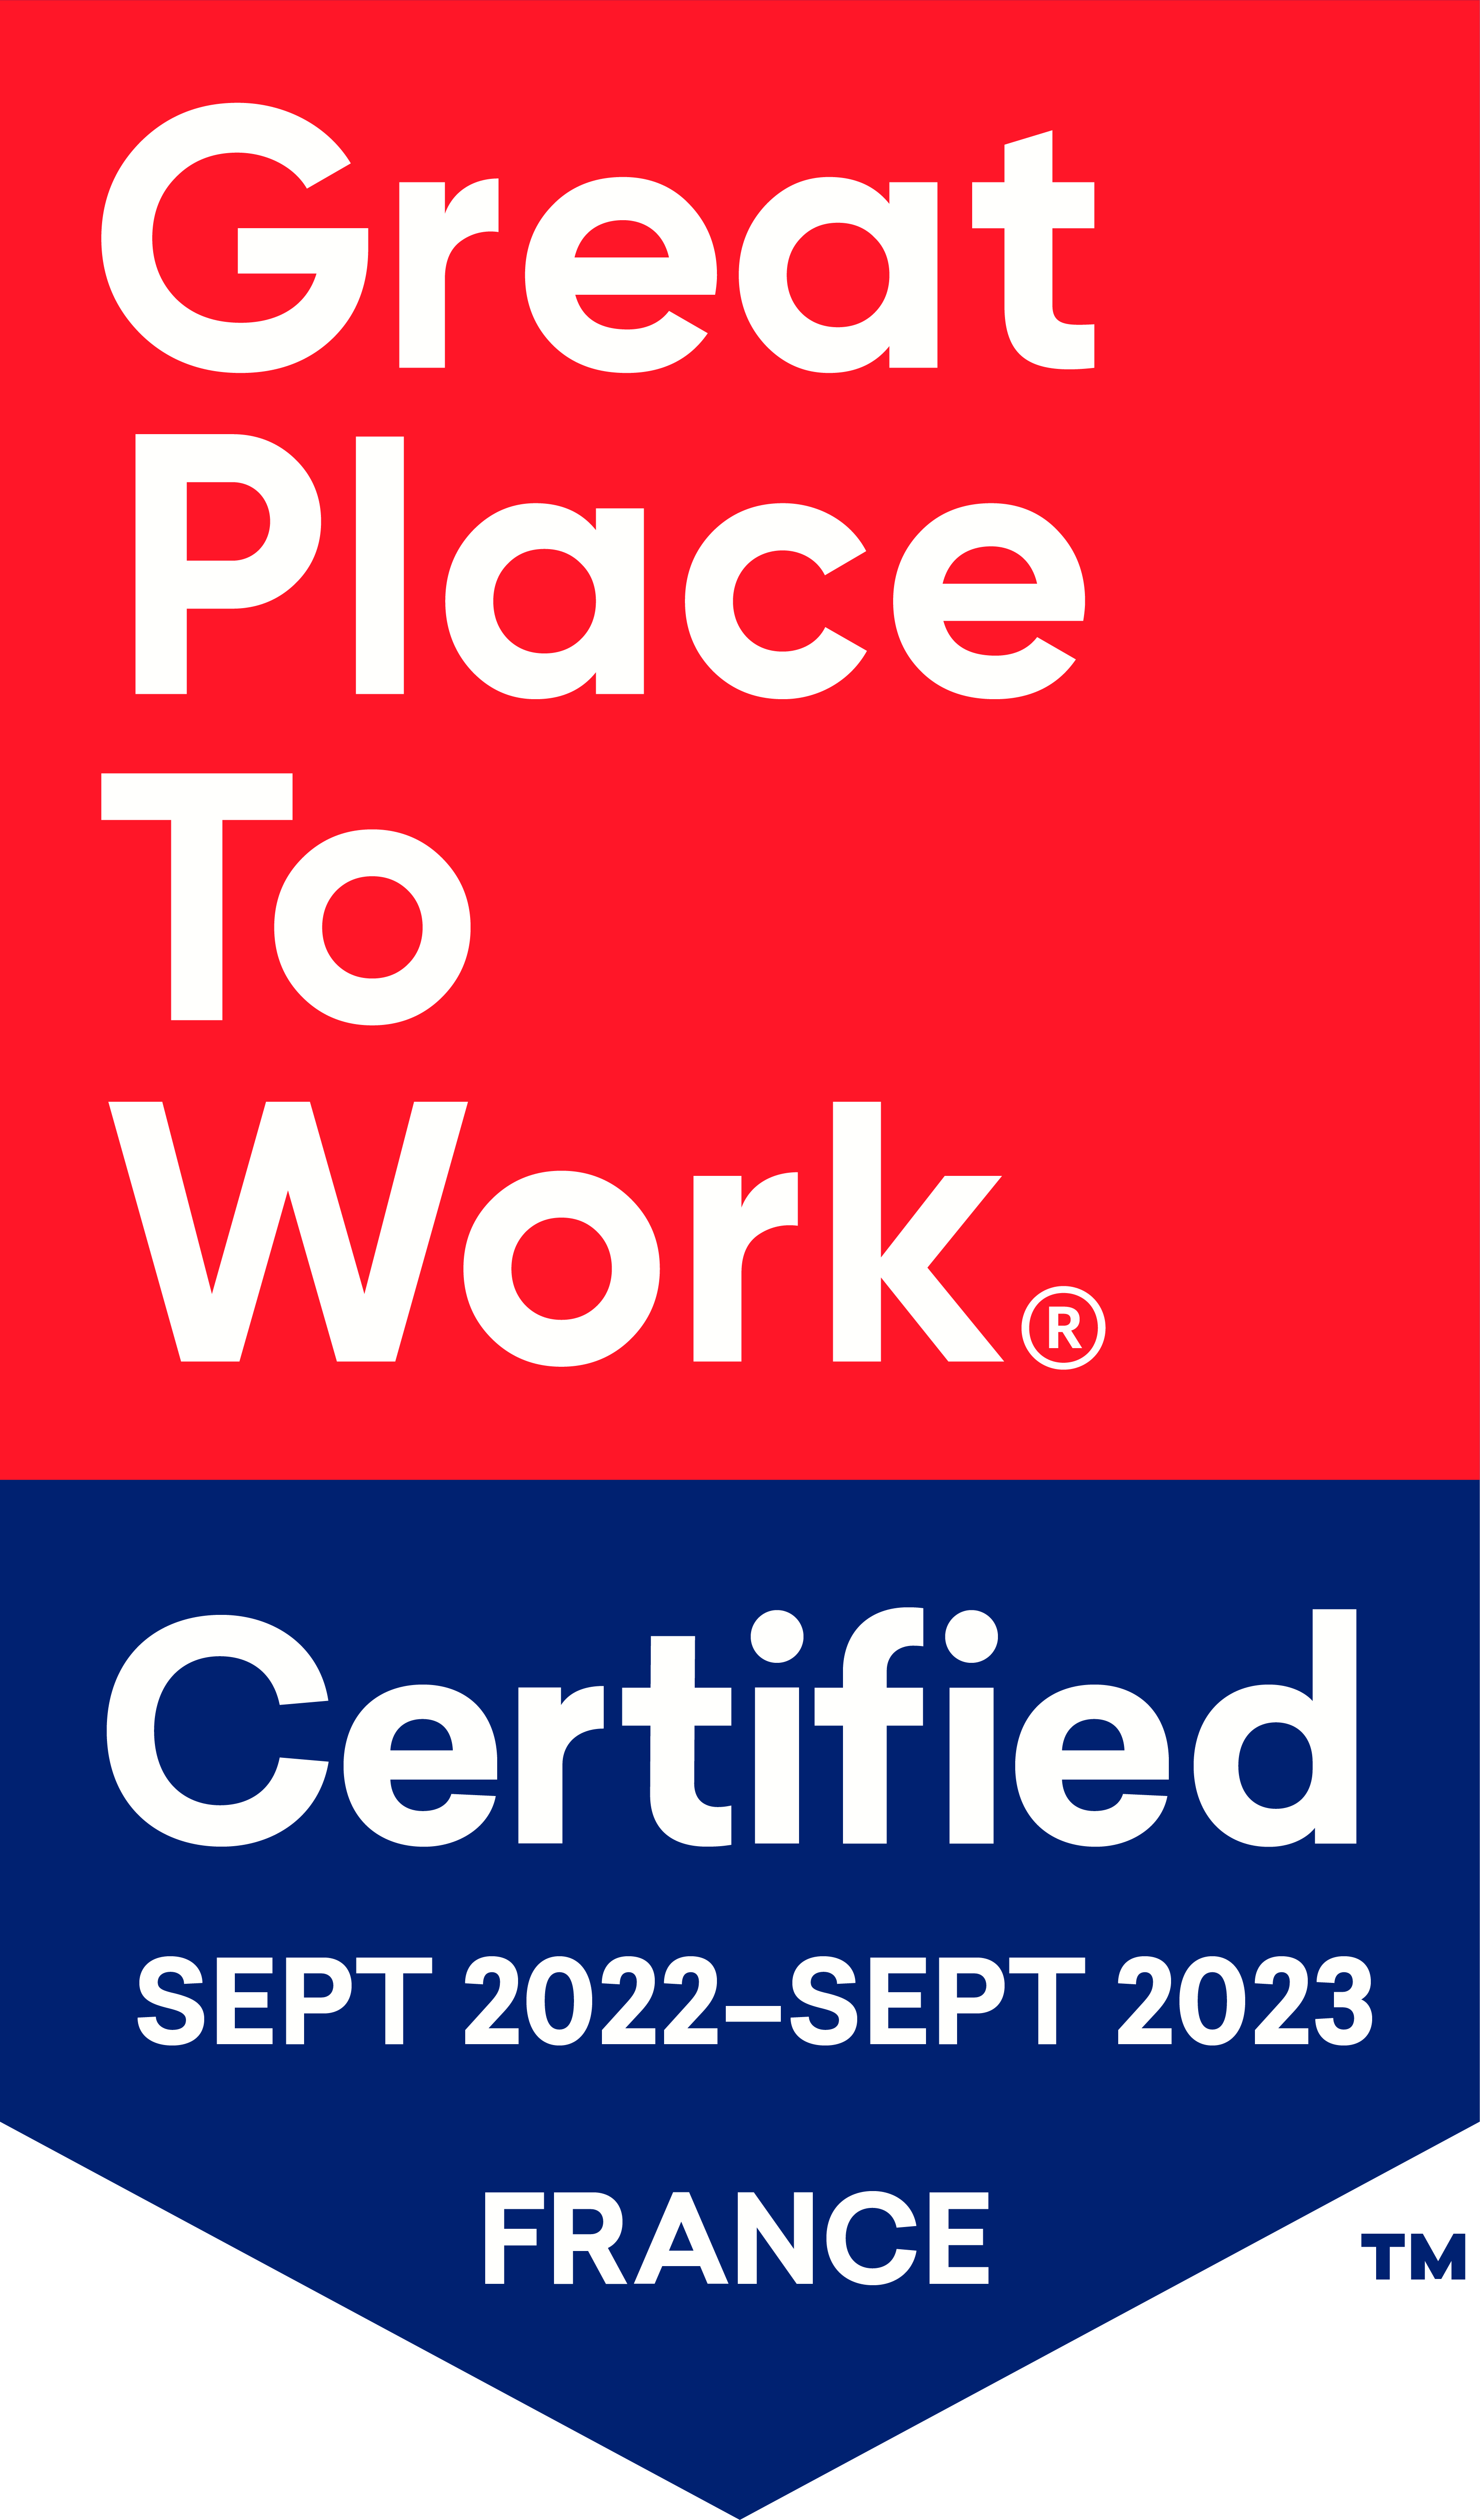 Best Workplaces France 2021 : Great place to work